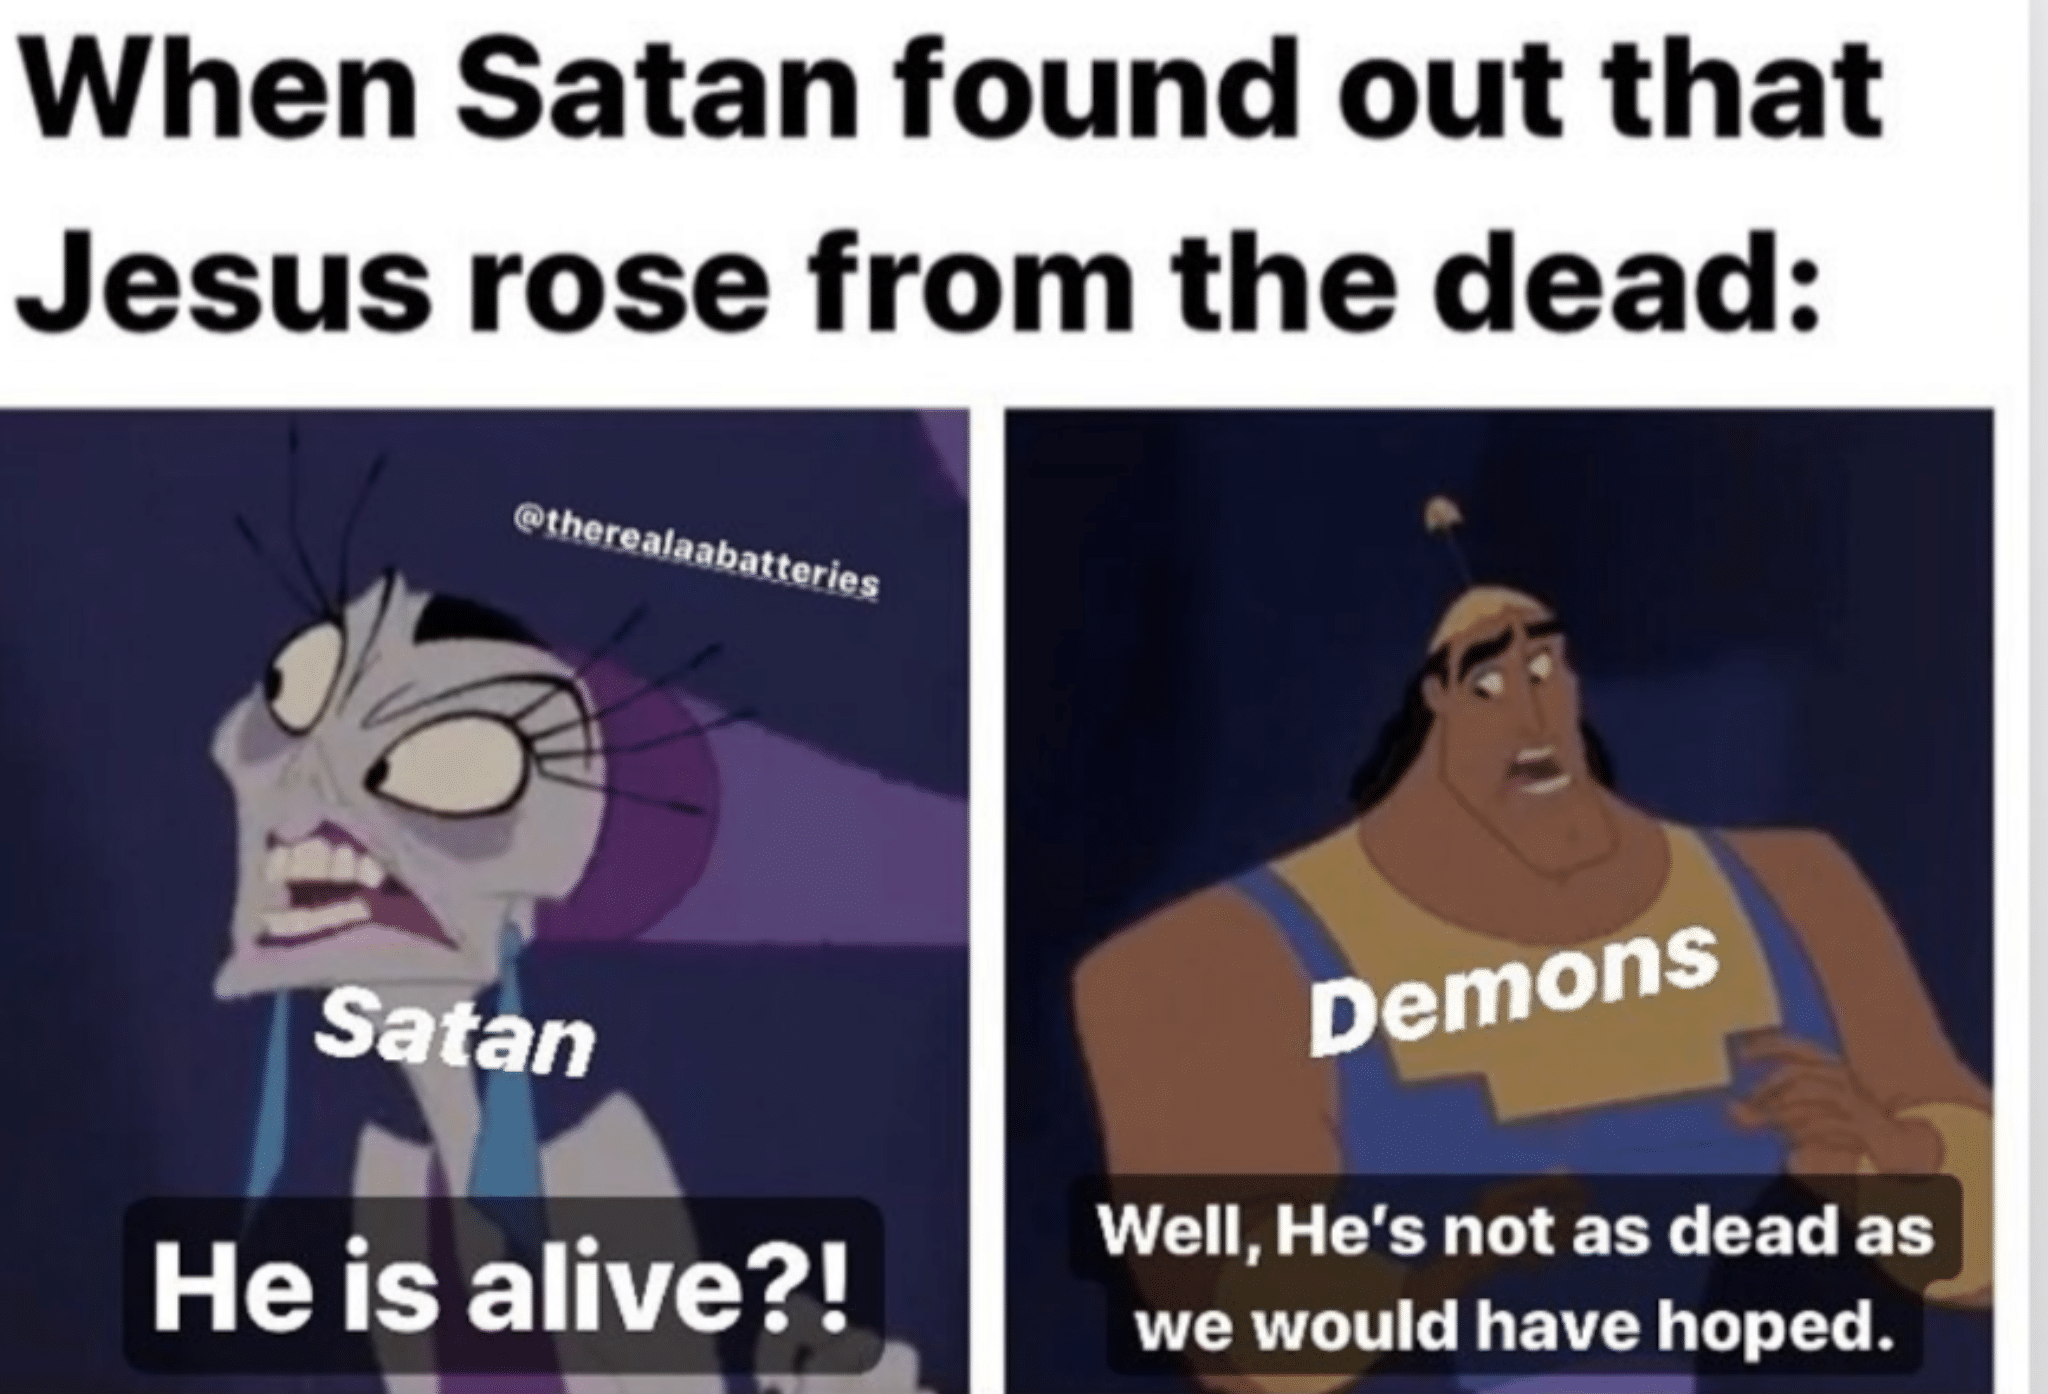 christian christian-memes christian text: When Satan found out that Jesus rose from the dead: Satan He is alive?! Demons Well, He's not as dead as we would have hoped. 